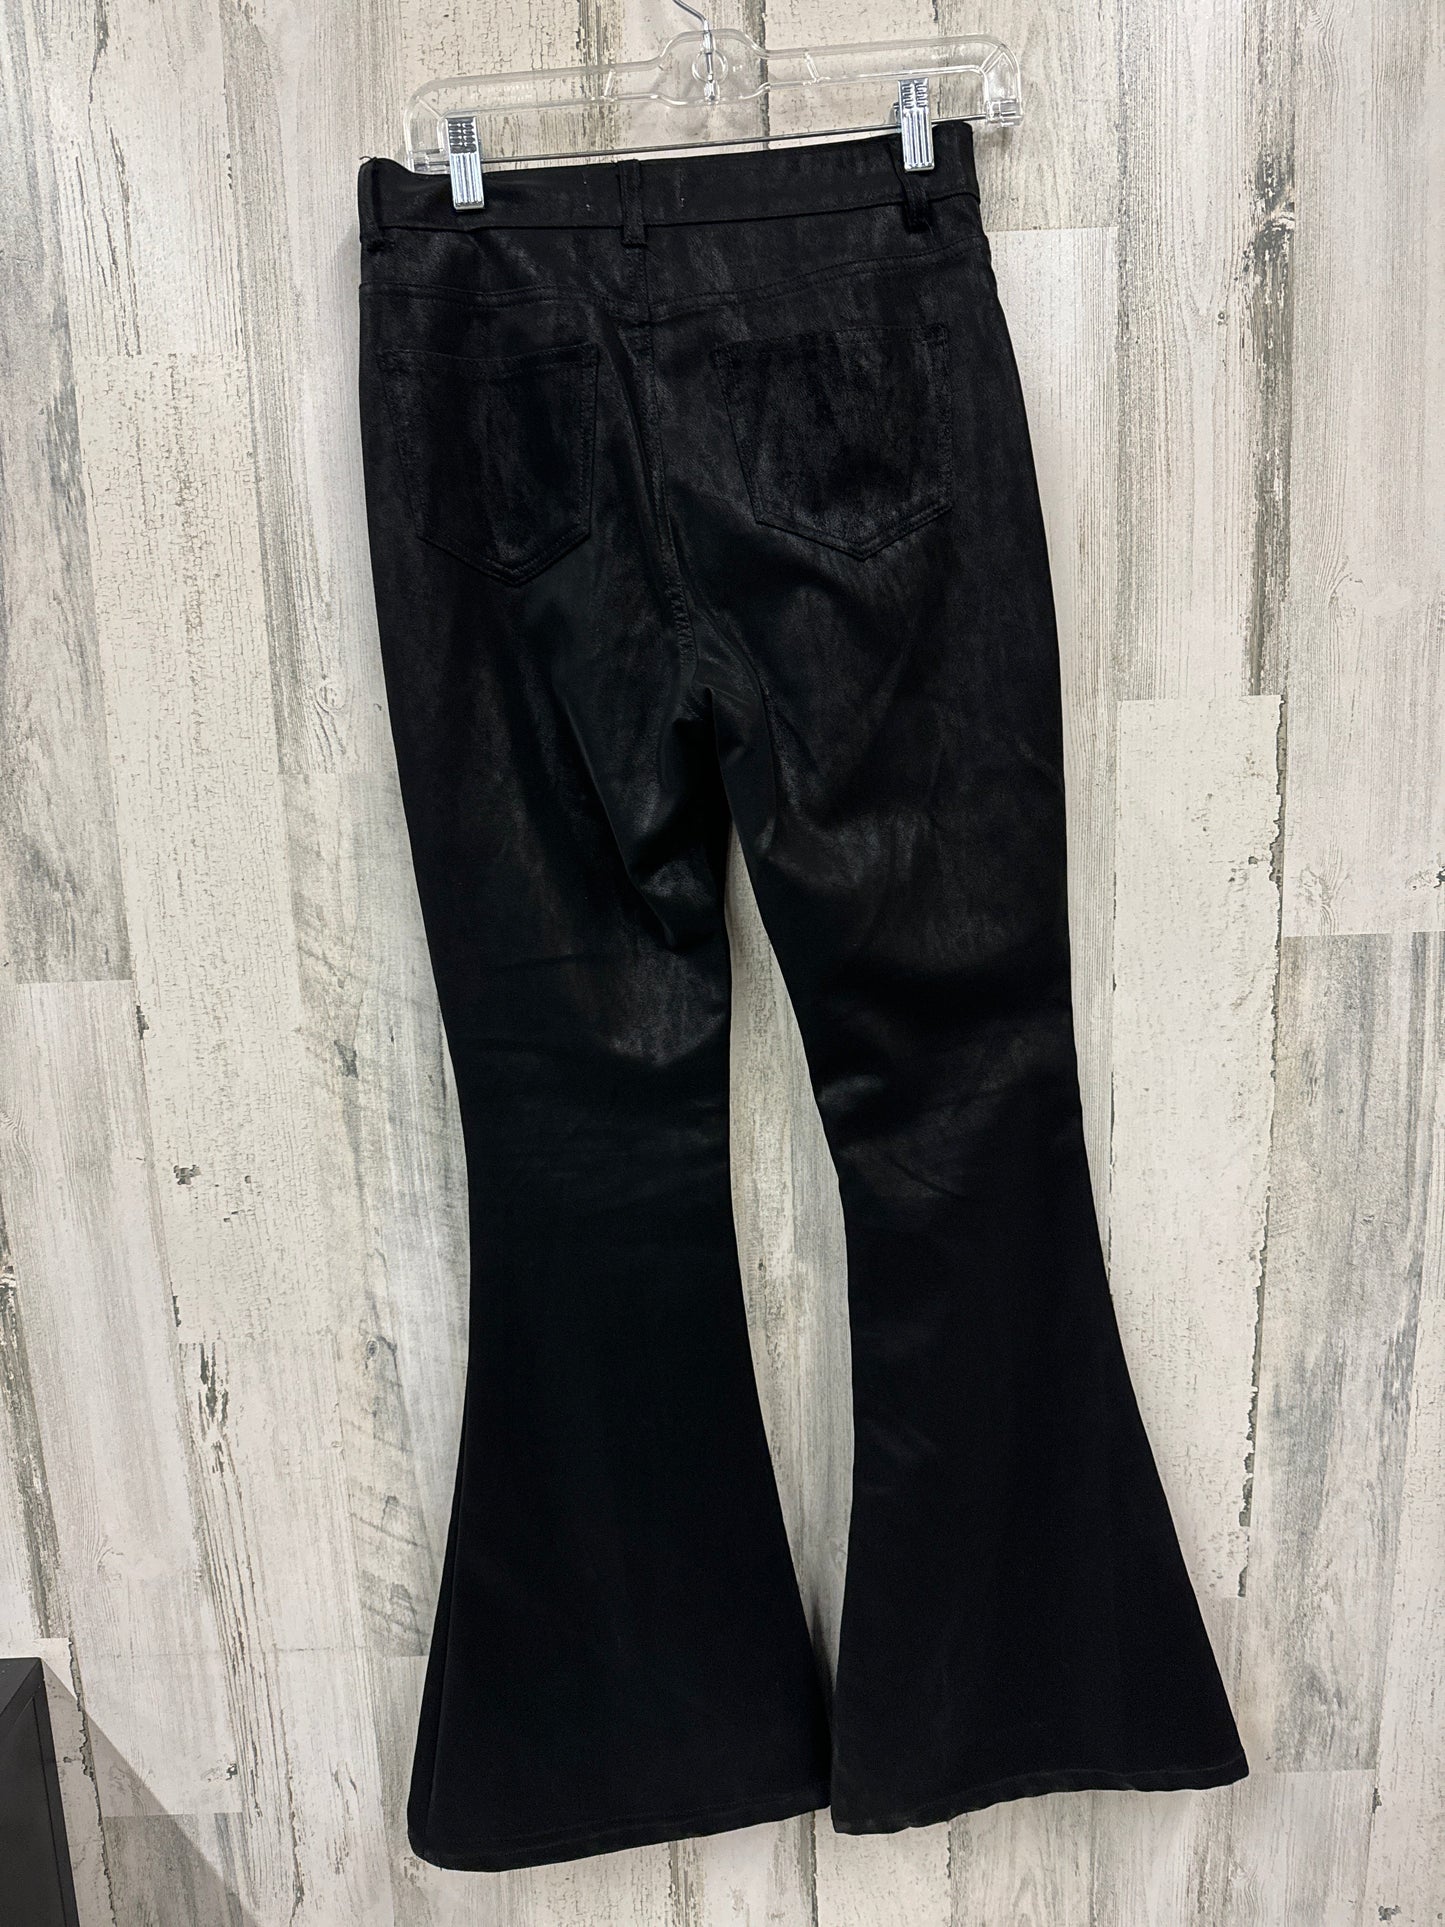 Pants Other By Clothes Mentor  Size: 4